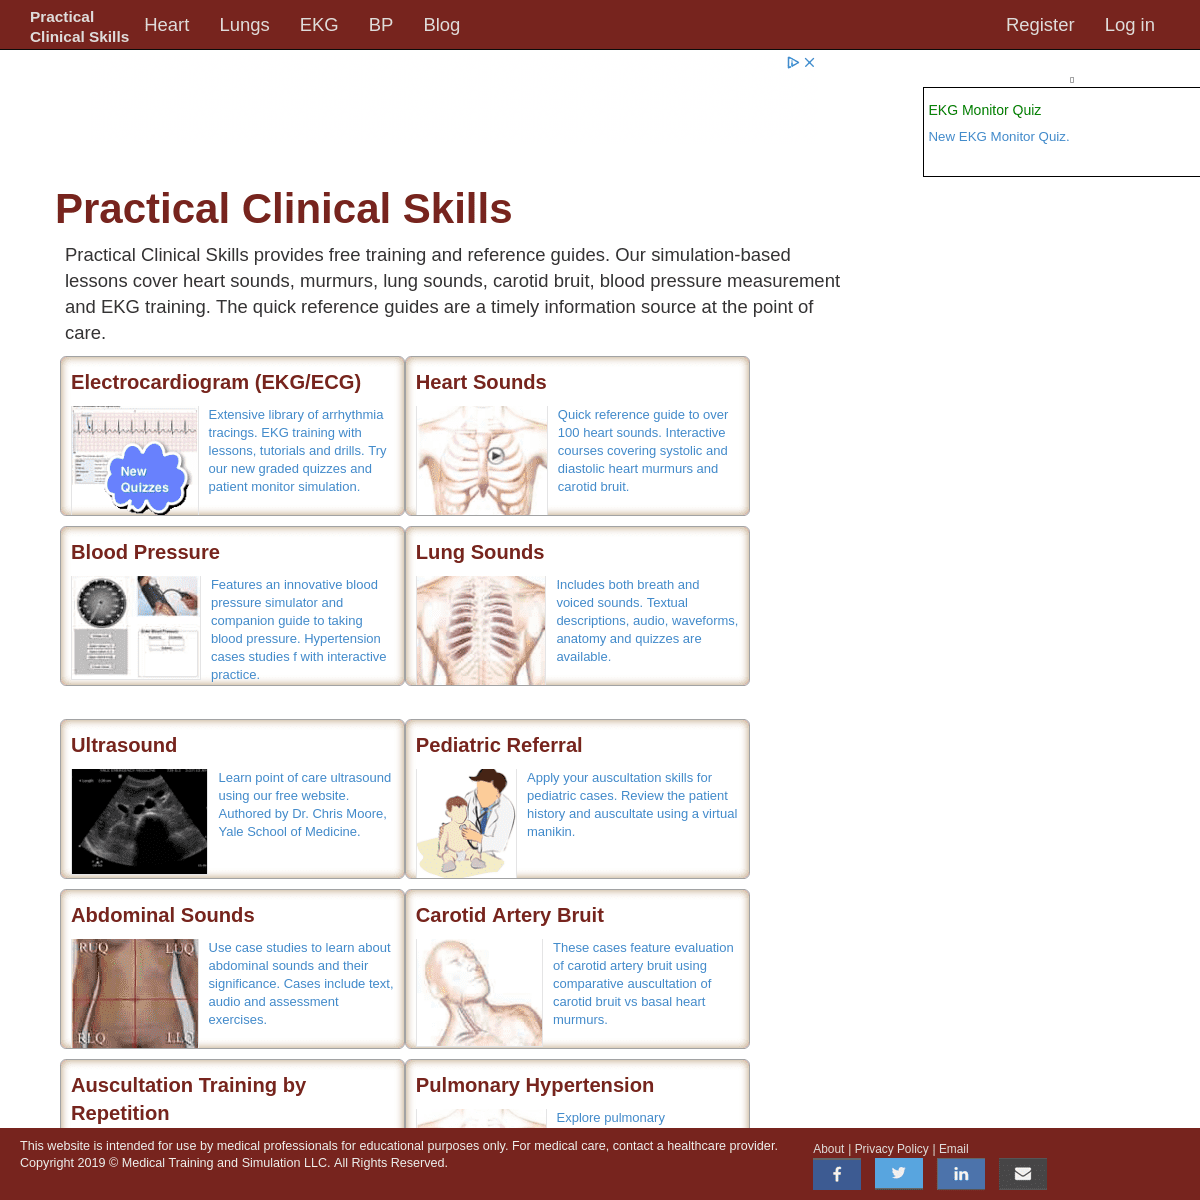 A complete backup of practicalclinicalskills.com